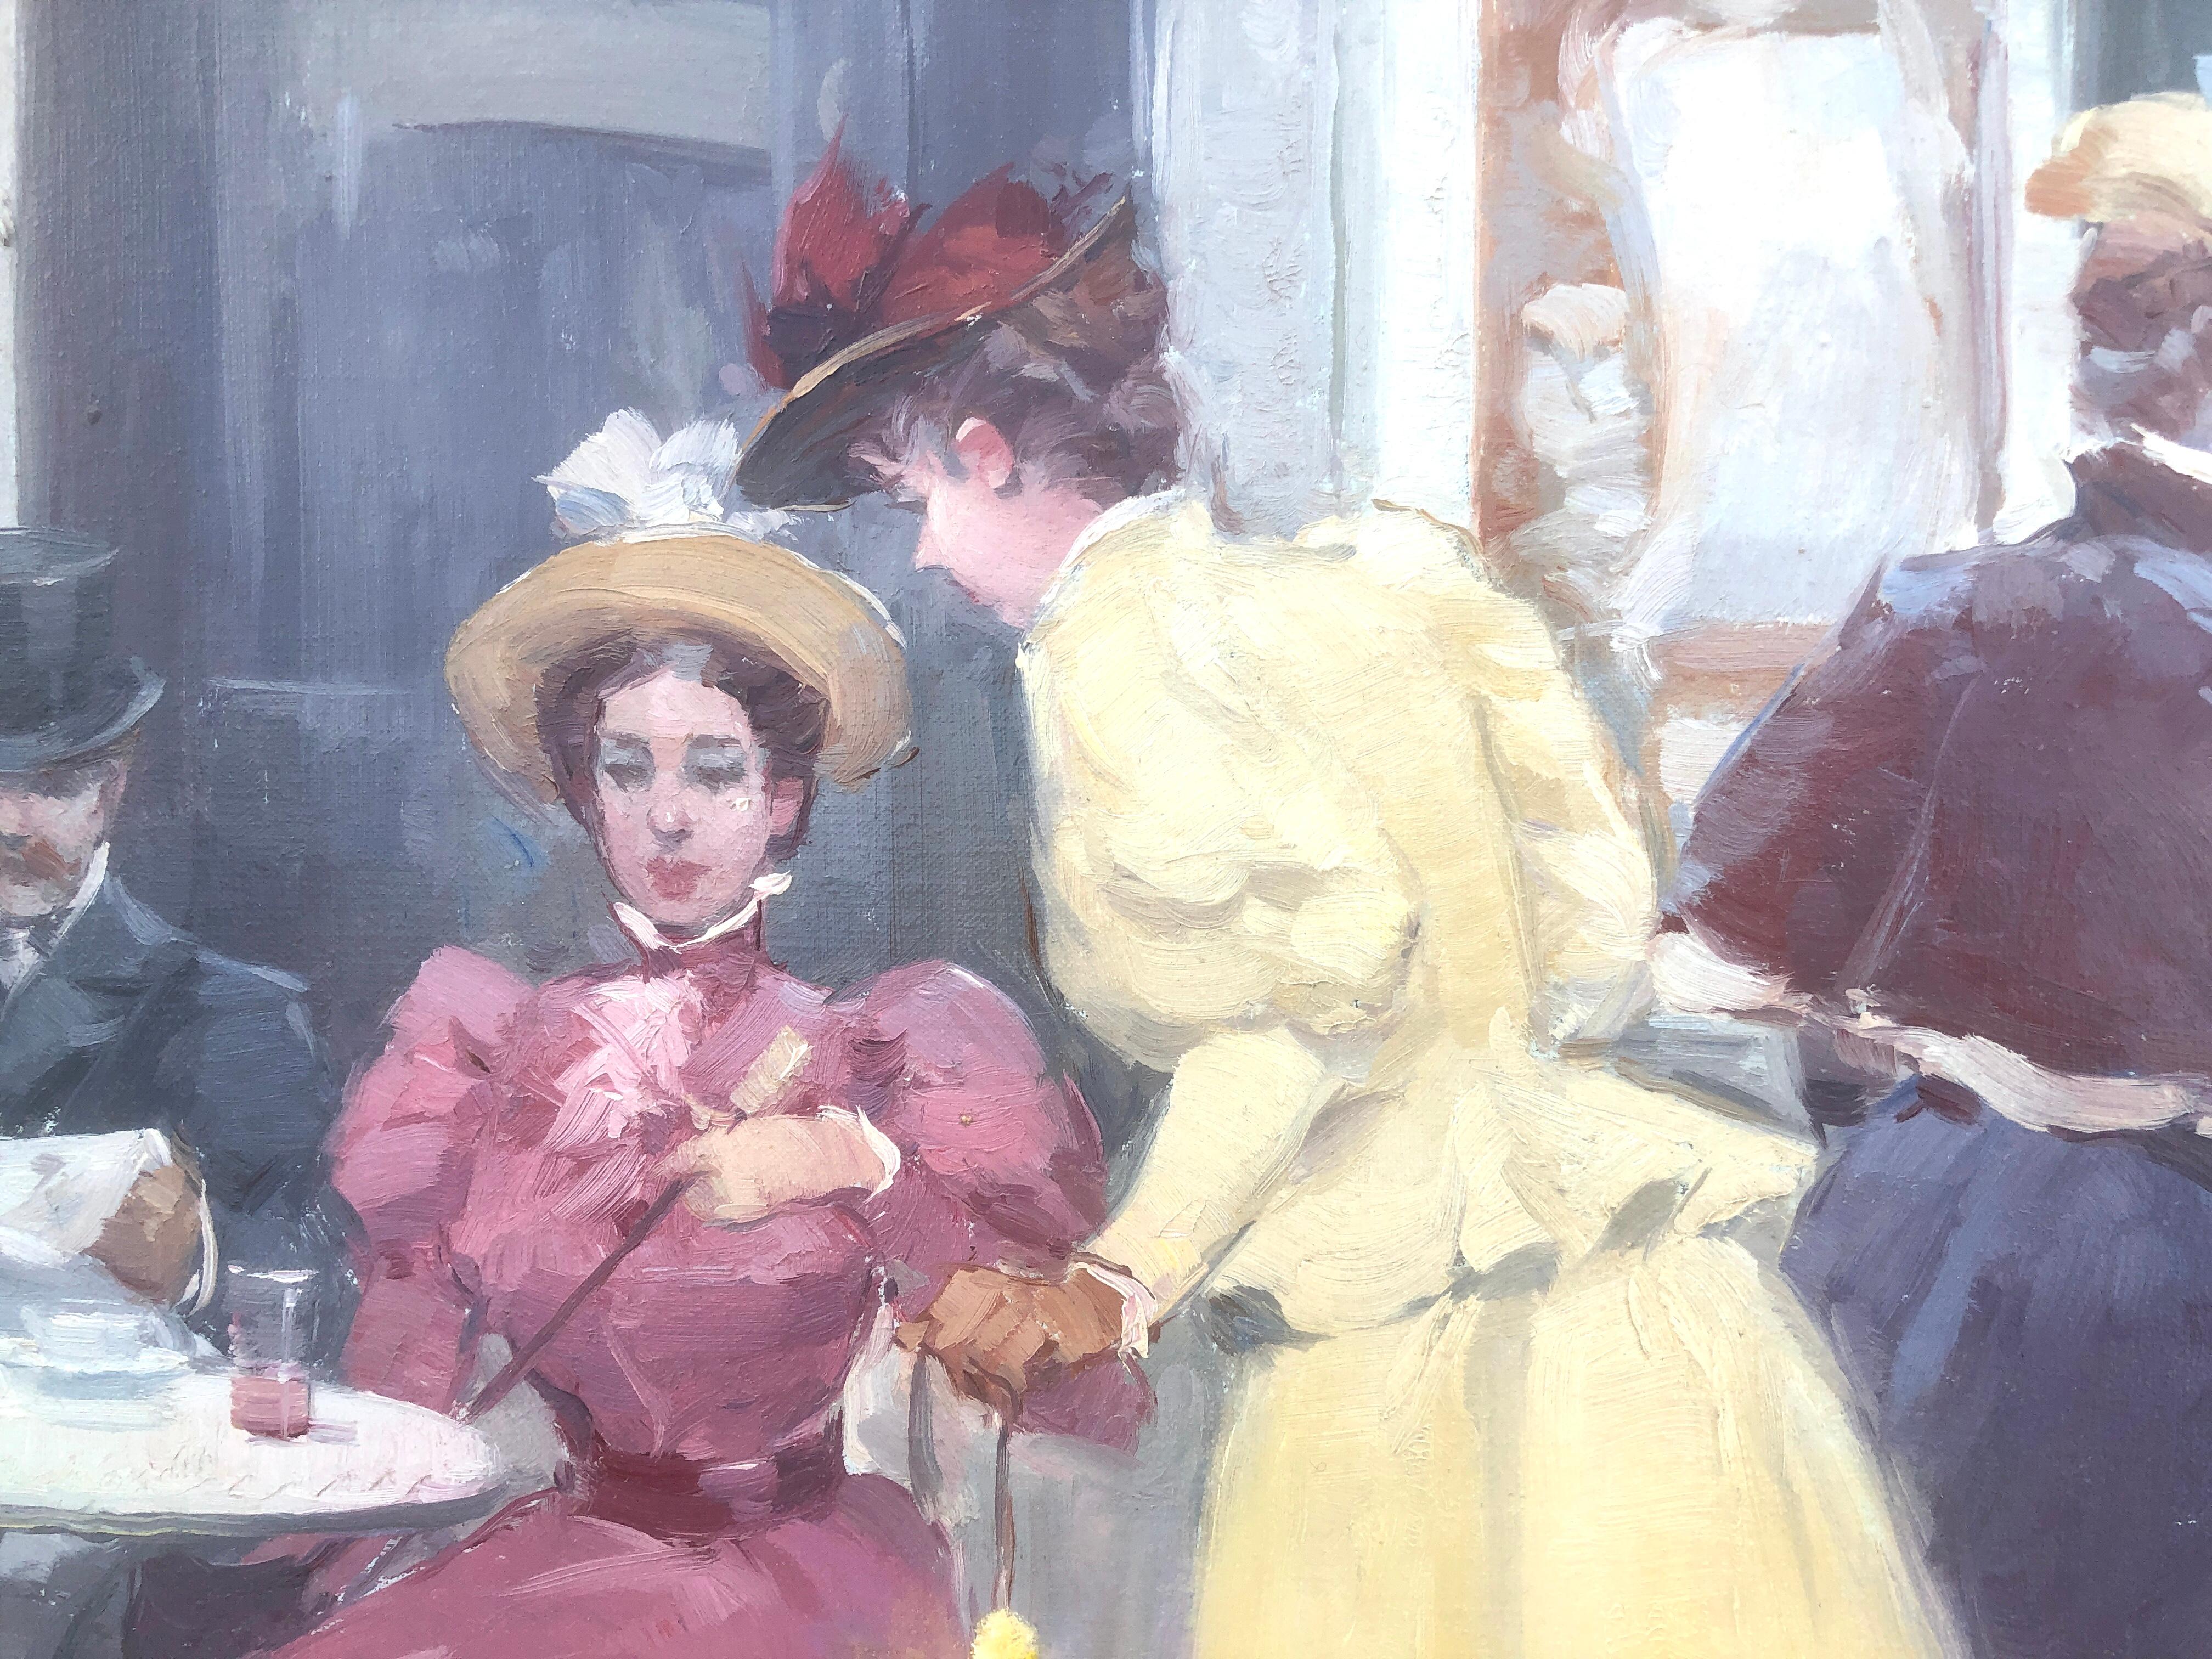 Frameless.

Luis Sagasta, an Impressionist Spanish painter, chose as his subjects scenes of the wealthy, such as racecourses and richly-dressed ladies and gentlemen in park settings. Sagasta shared studio space for years with fellow Spanish painter